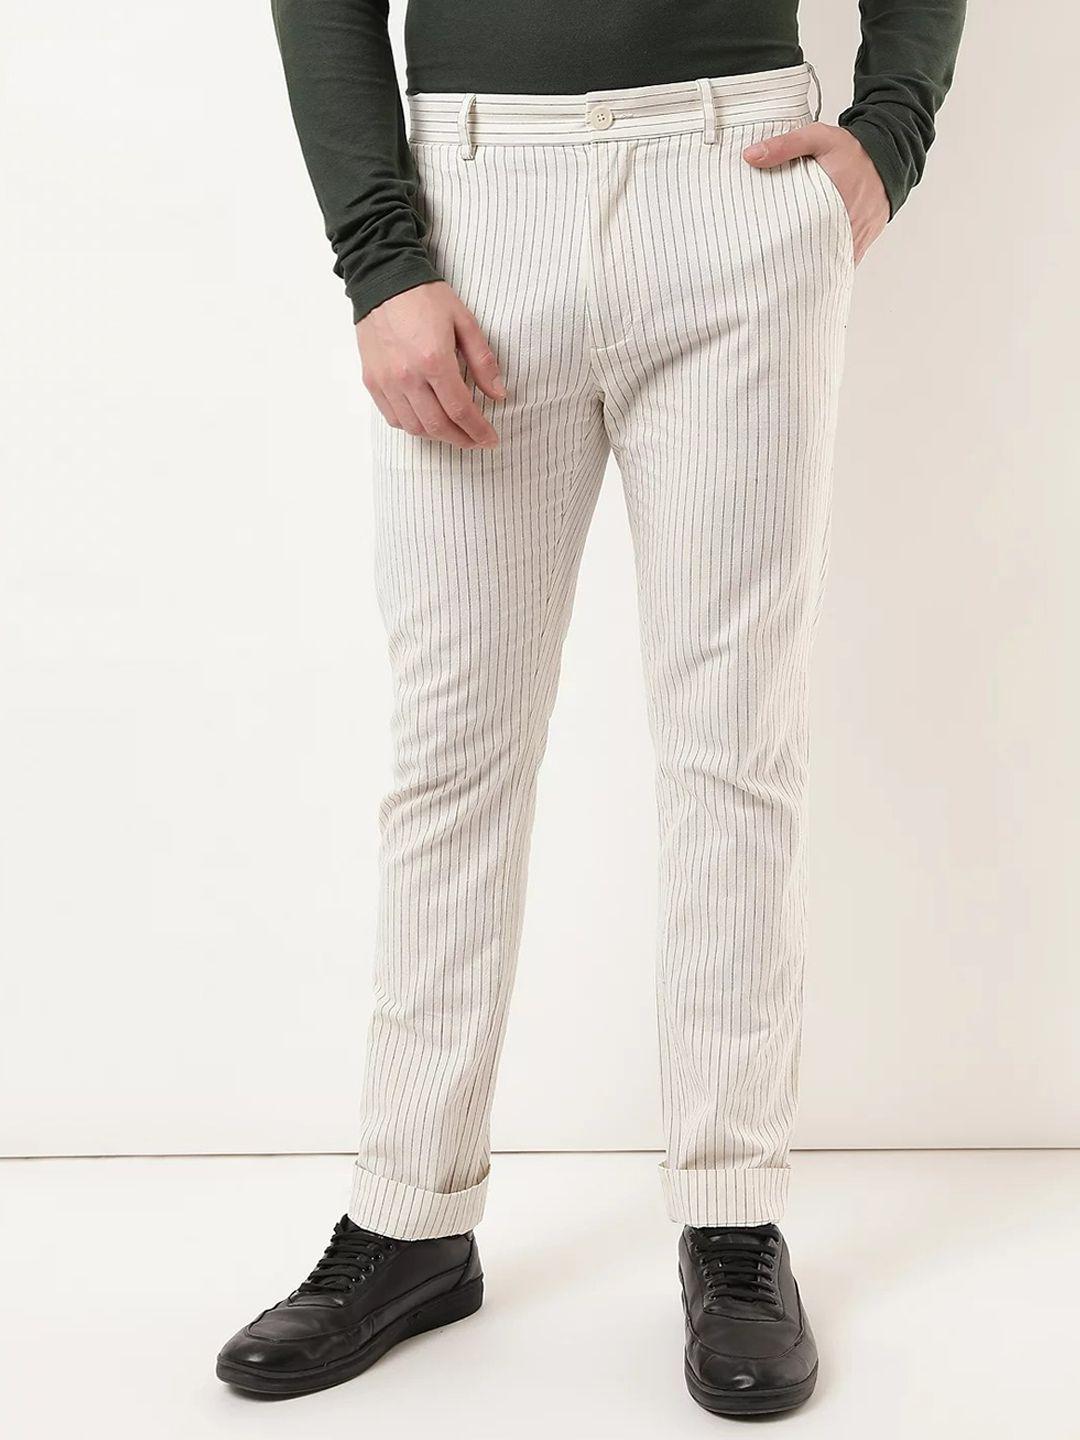 marks & spencer men beige striped chinos trousers